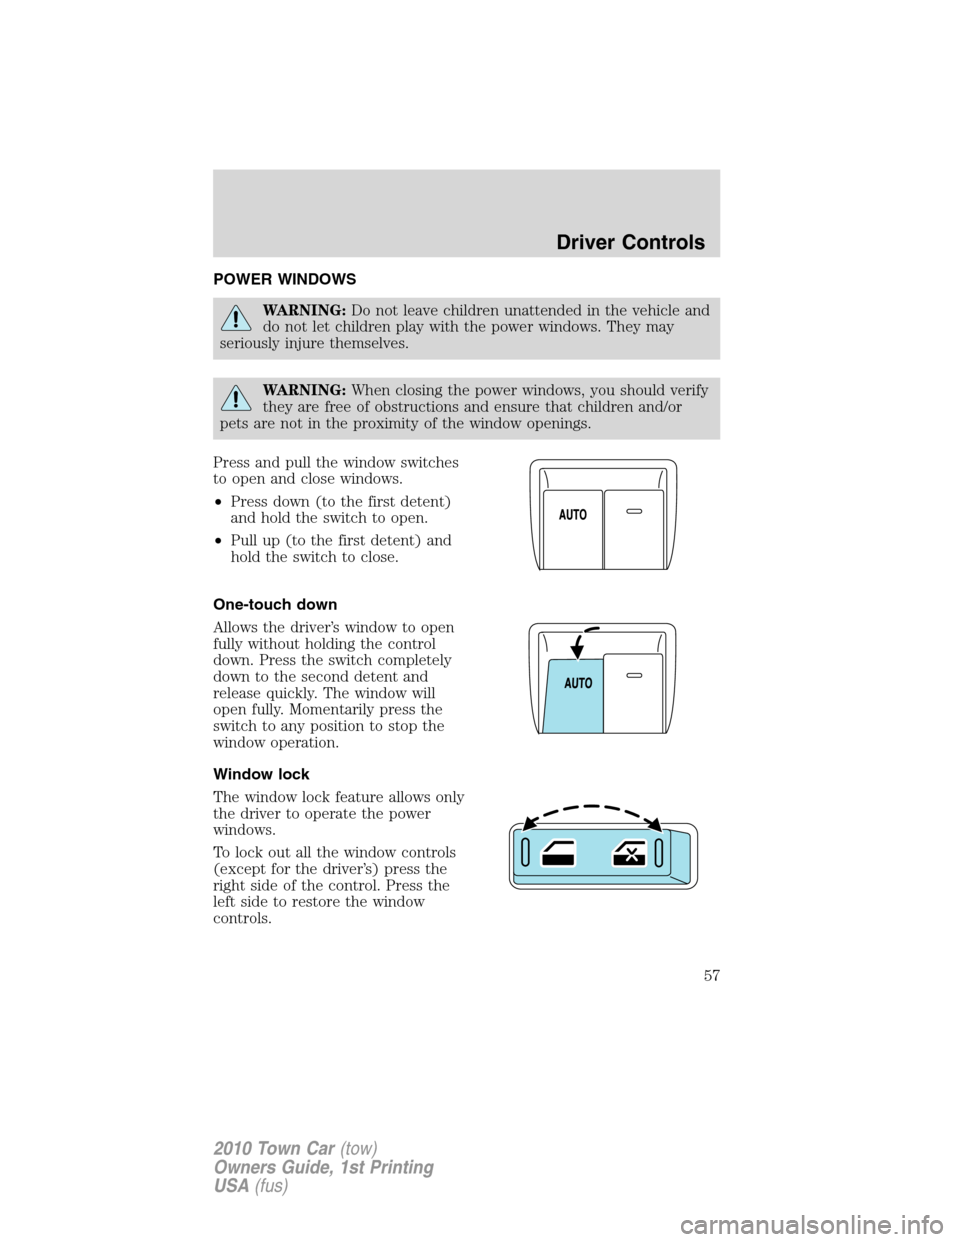 LINCOLN TOWN CAR 2010 Owners Manual POWER WINDOWS
WARNING:Do not leave children unattended in the vehicle and
do not let children play with the power windows. They may
seriously injure themselves.
WARNING:When closing the power windows,